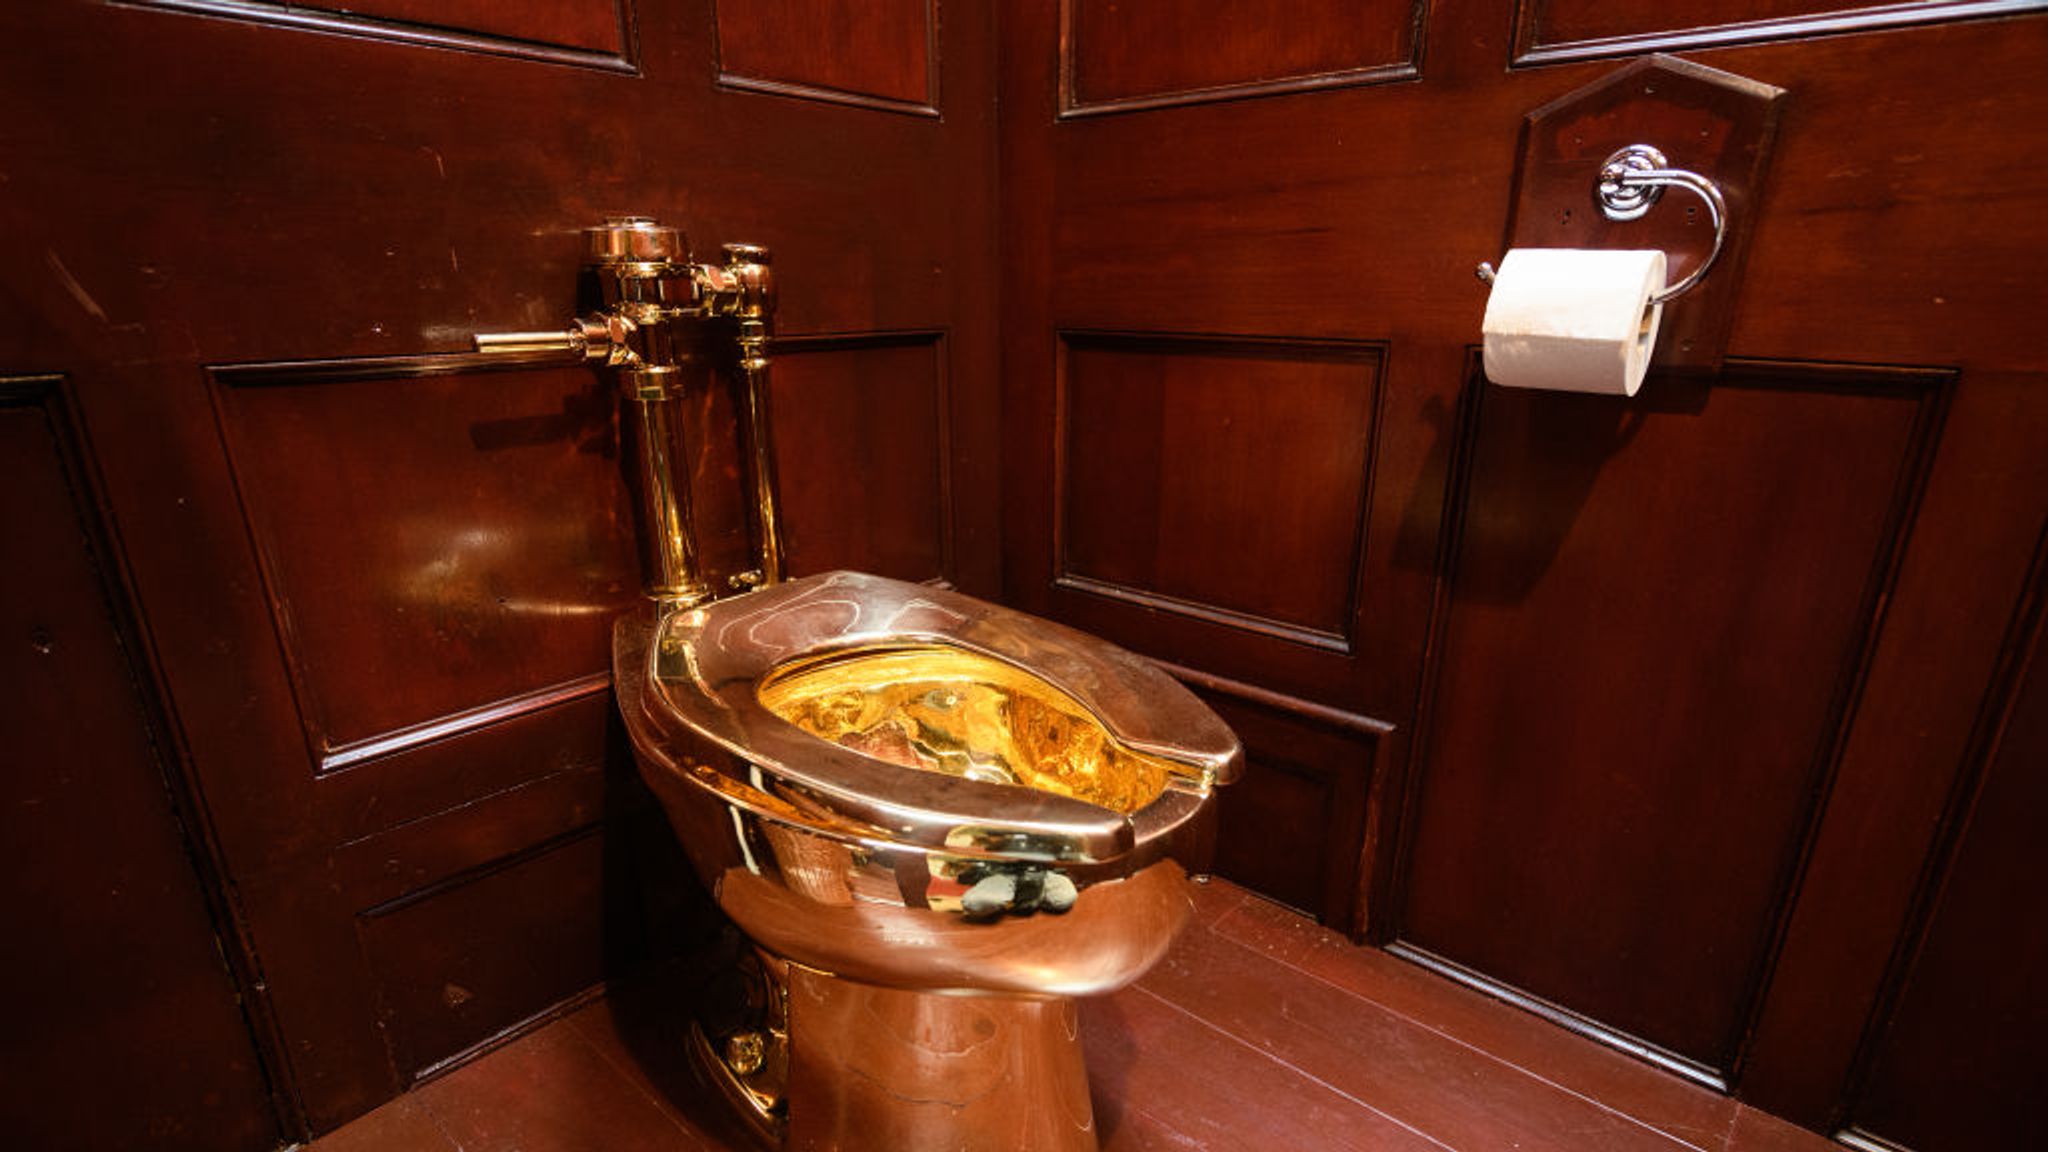 The Greed Chronicles: Corporate Shenanigans and Gold-Plated Toilet Seats